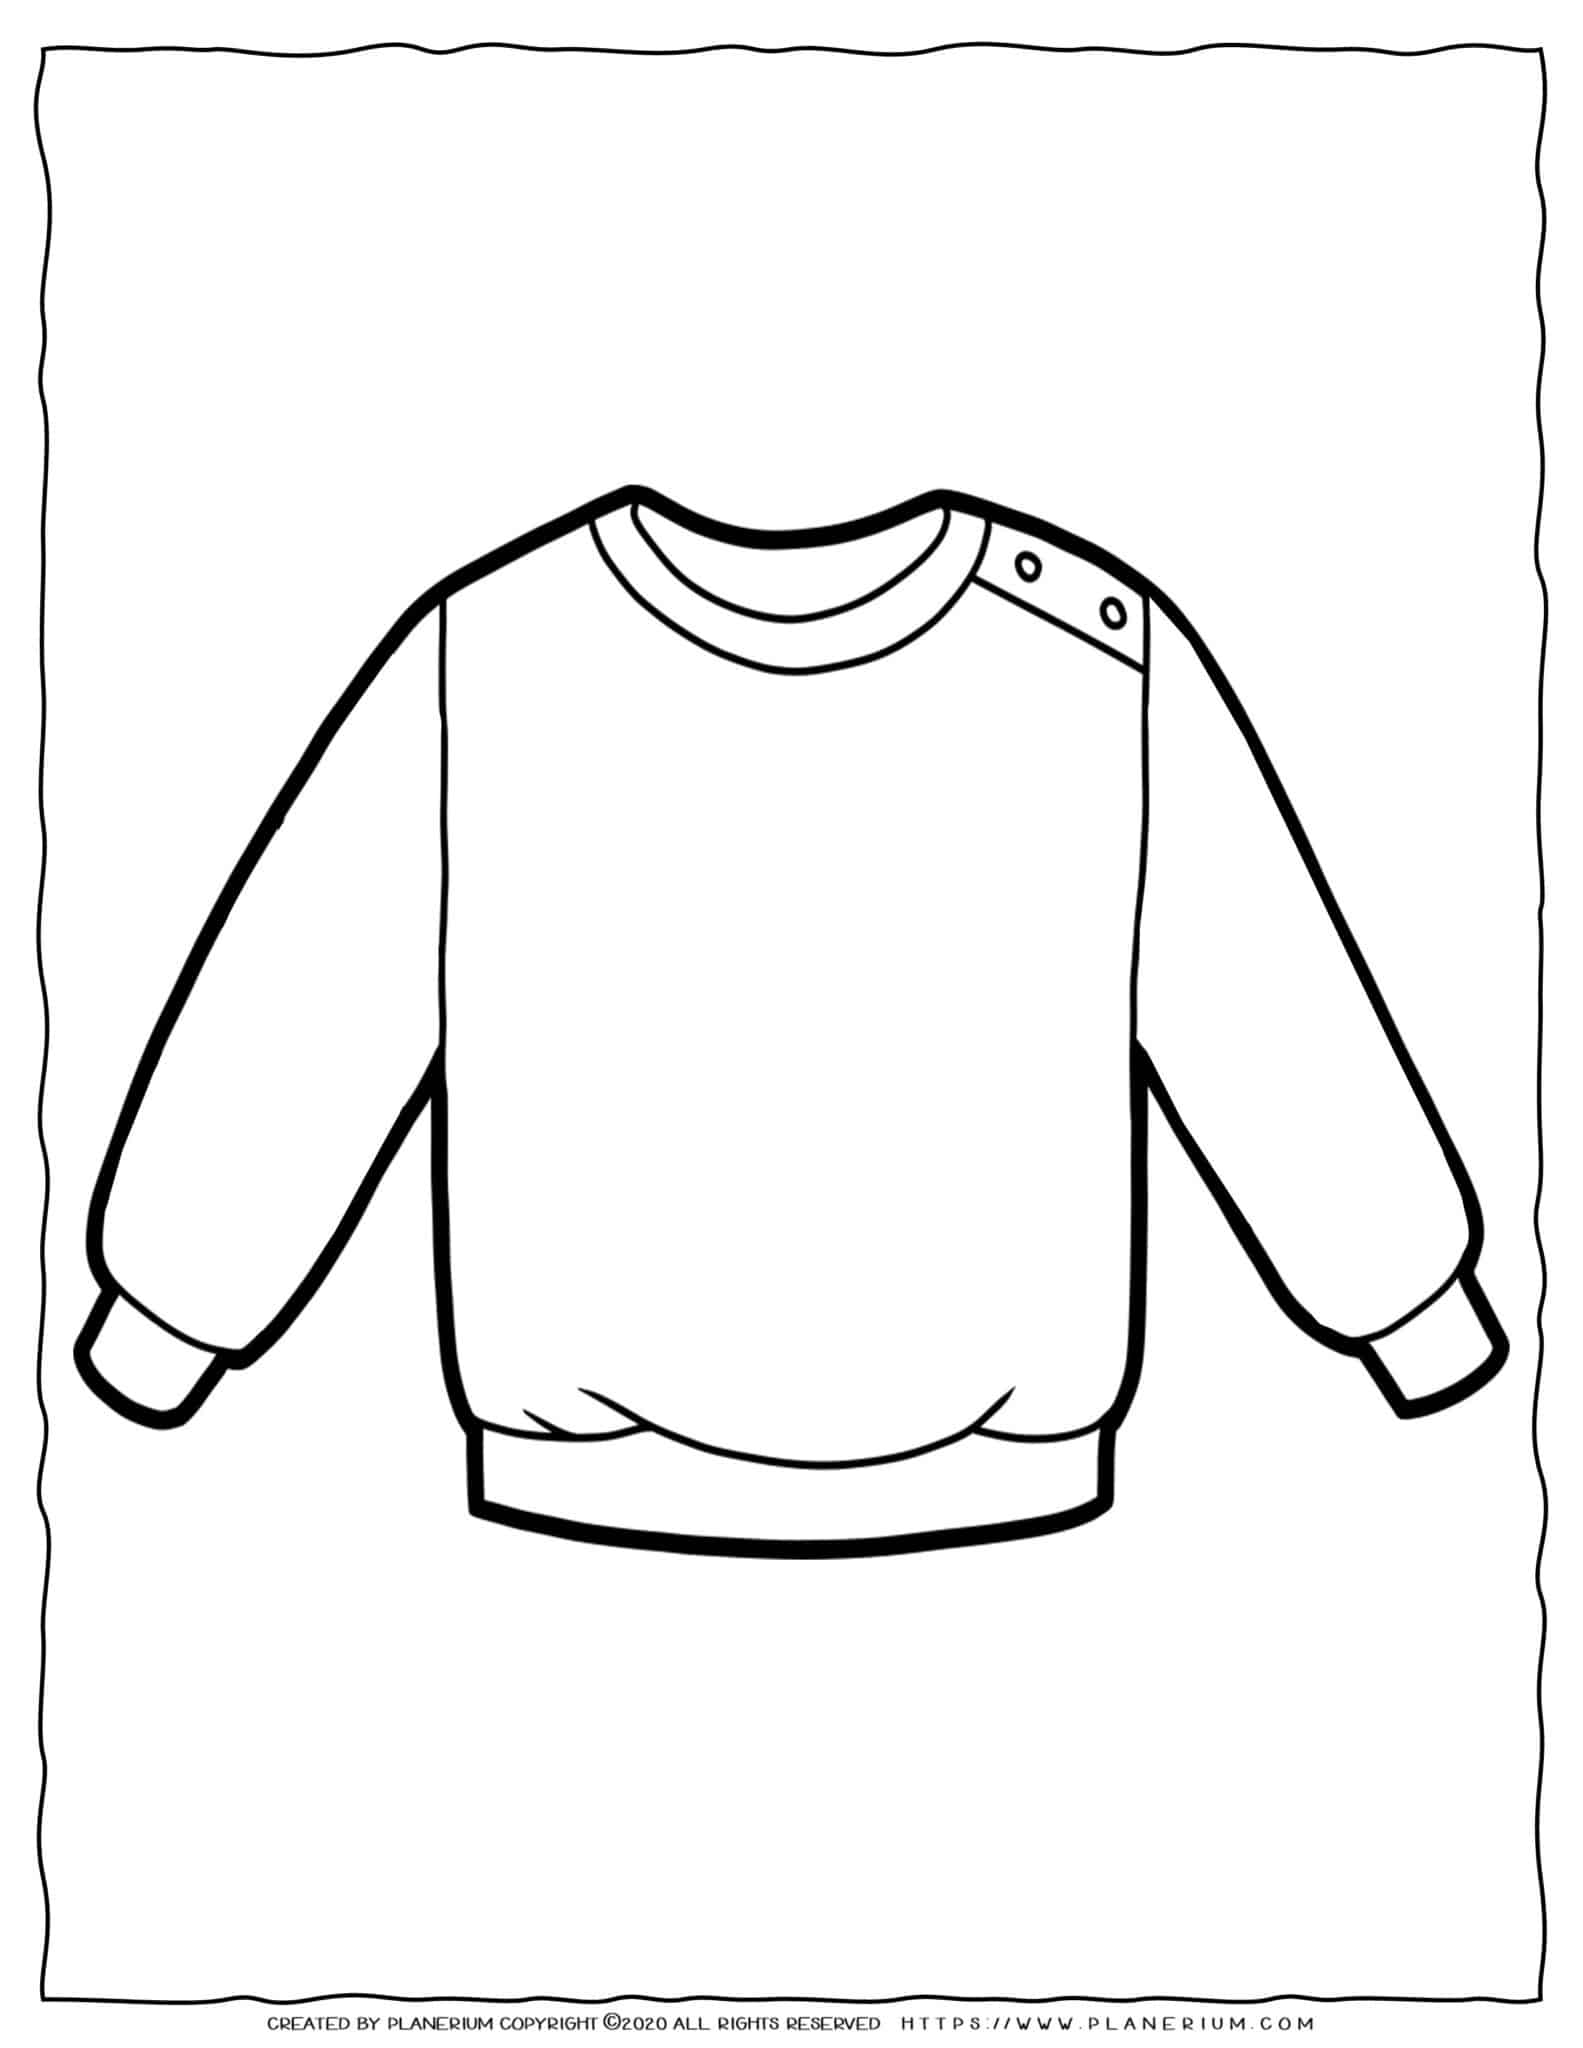 Clothes Coloring Page - One Sweater | Planerium